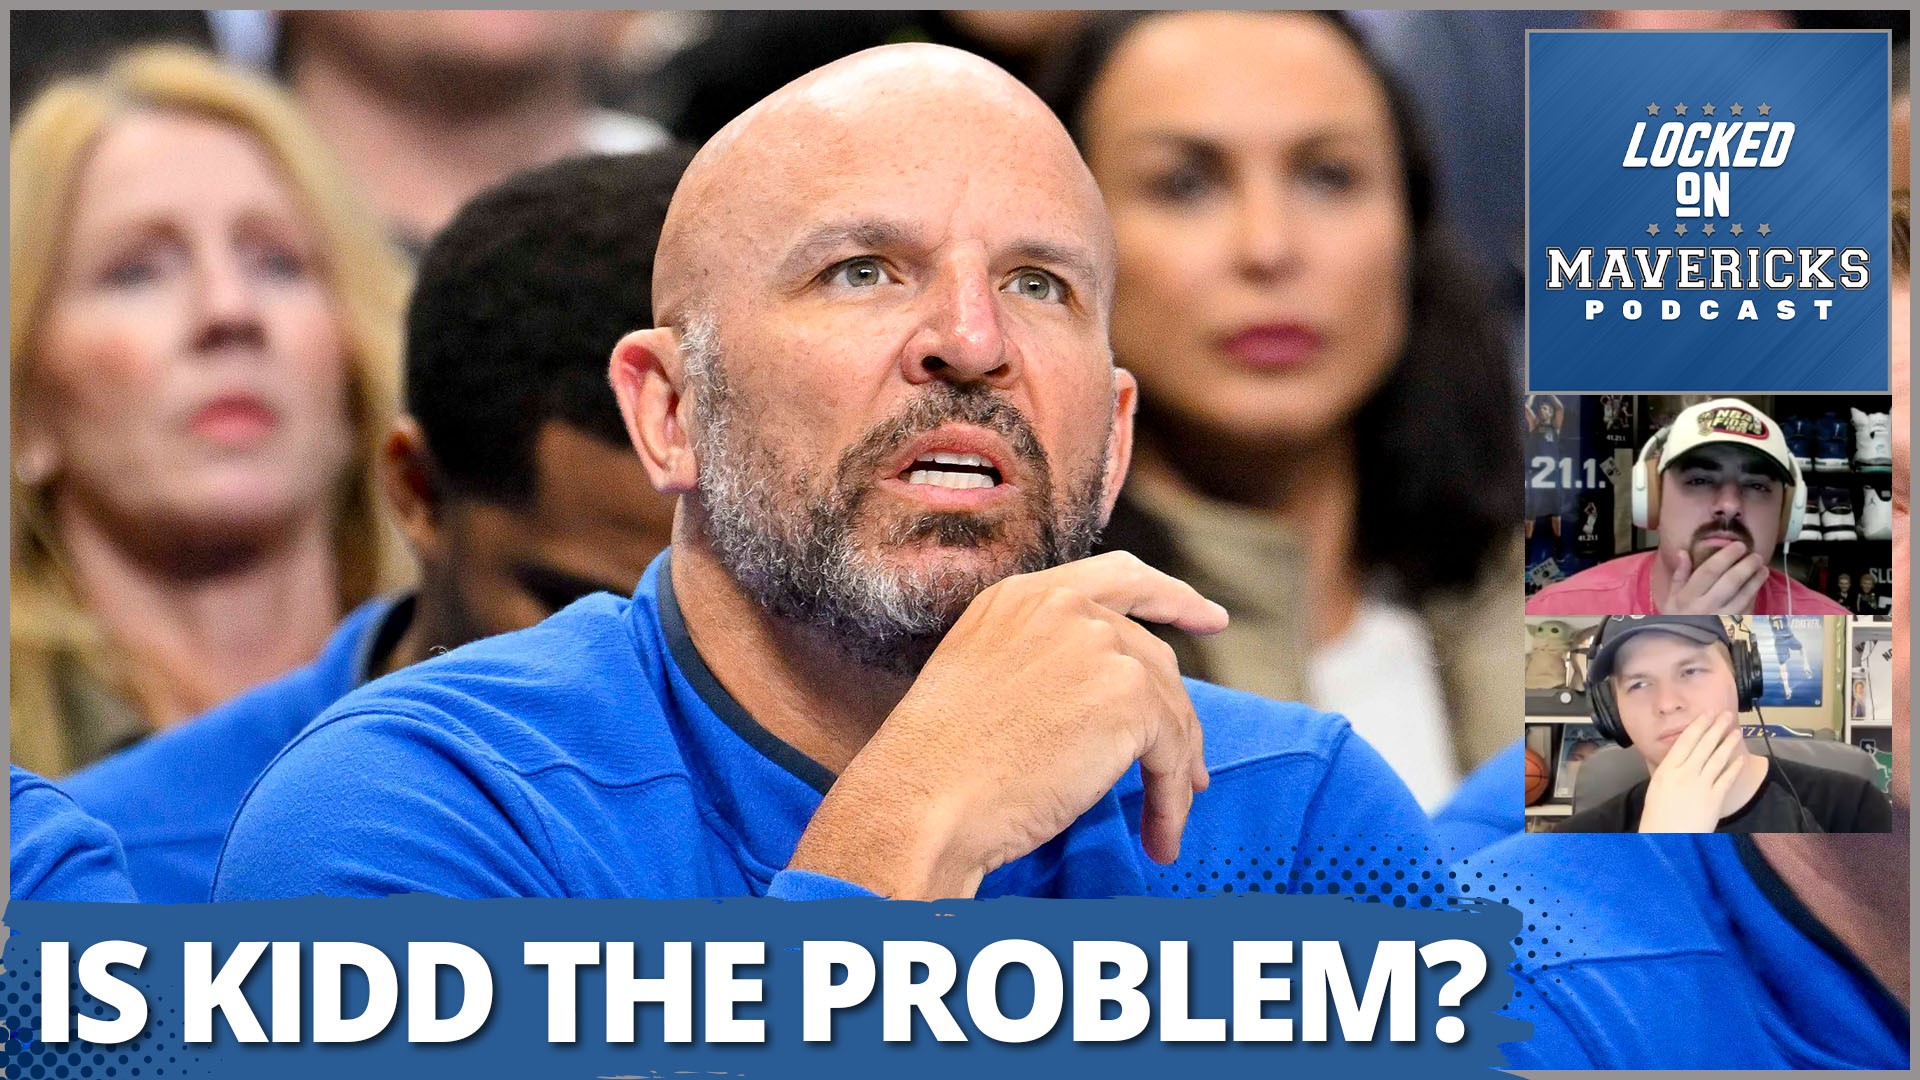 Nick Angstadt & Isaac Harris discuss the job Coach Jason Kidd has done this season with the Mavs. Has Kidd been the Mavs biggest problem this year?